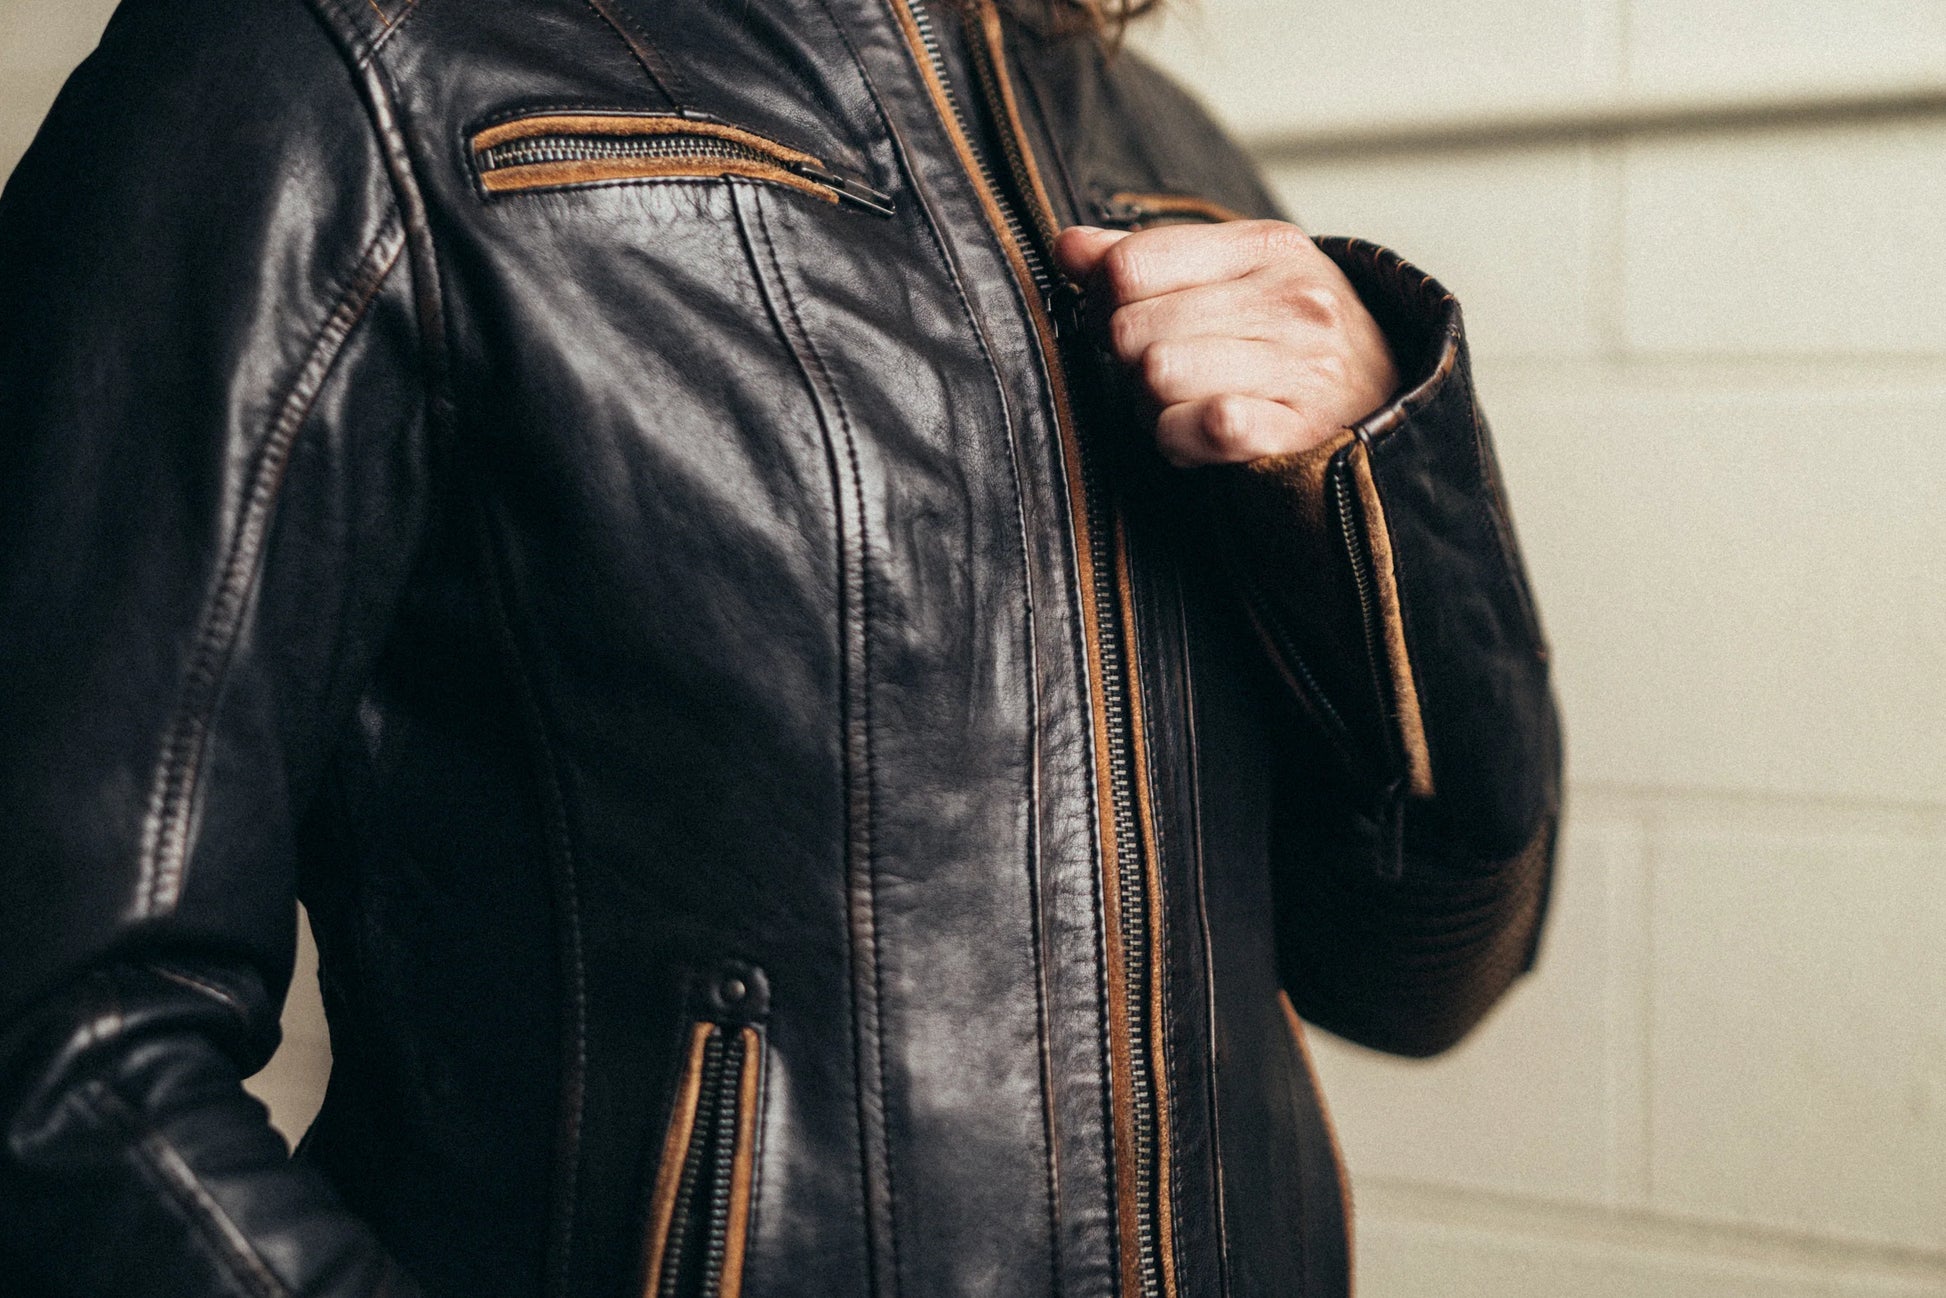 Woman wearing Electra Leather Motorcycle Jacket, front view showcasing the fit and style on her figure.